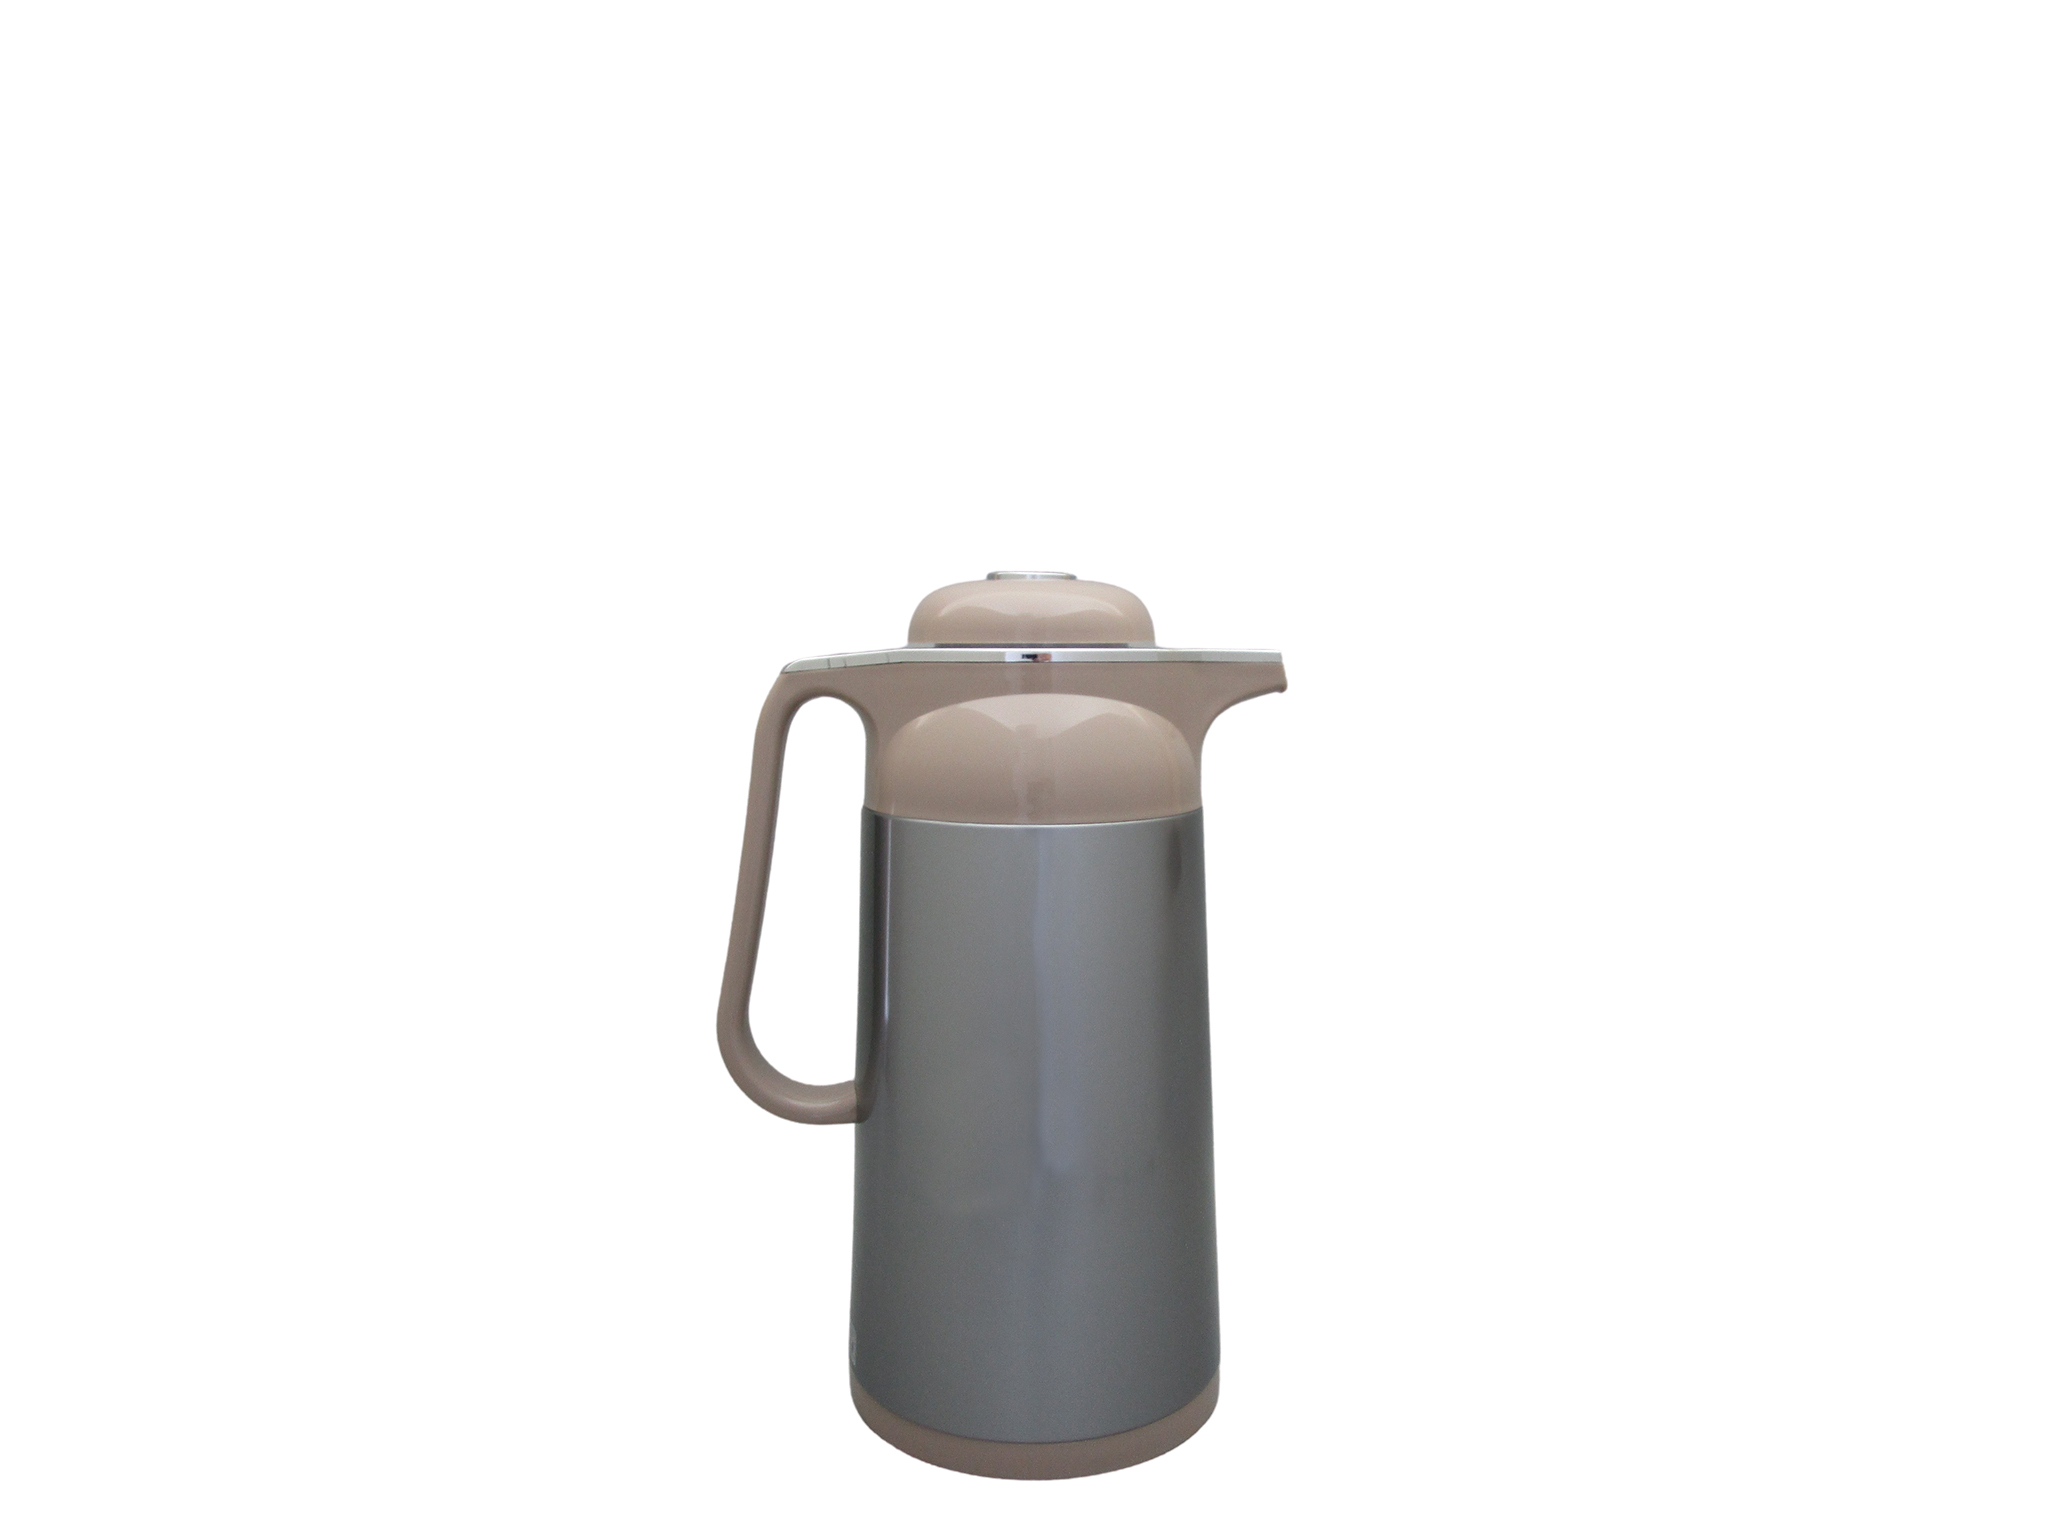 WAM13-040 - Pichet isotherme corps métal taupe 1.30 L - Isobel